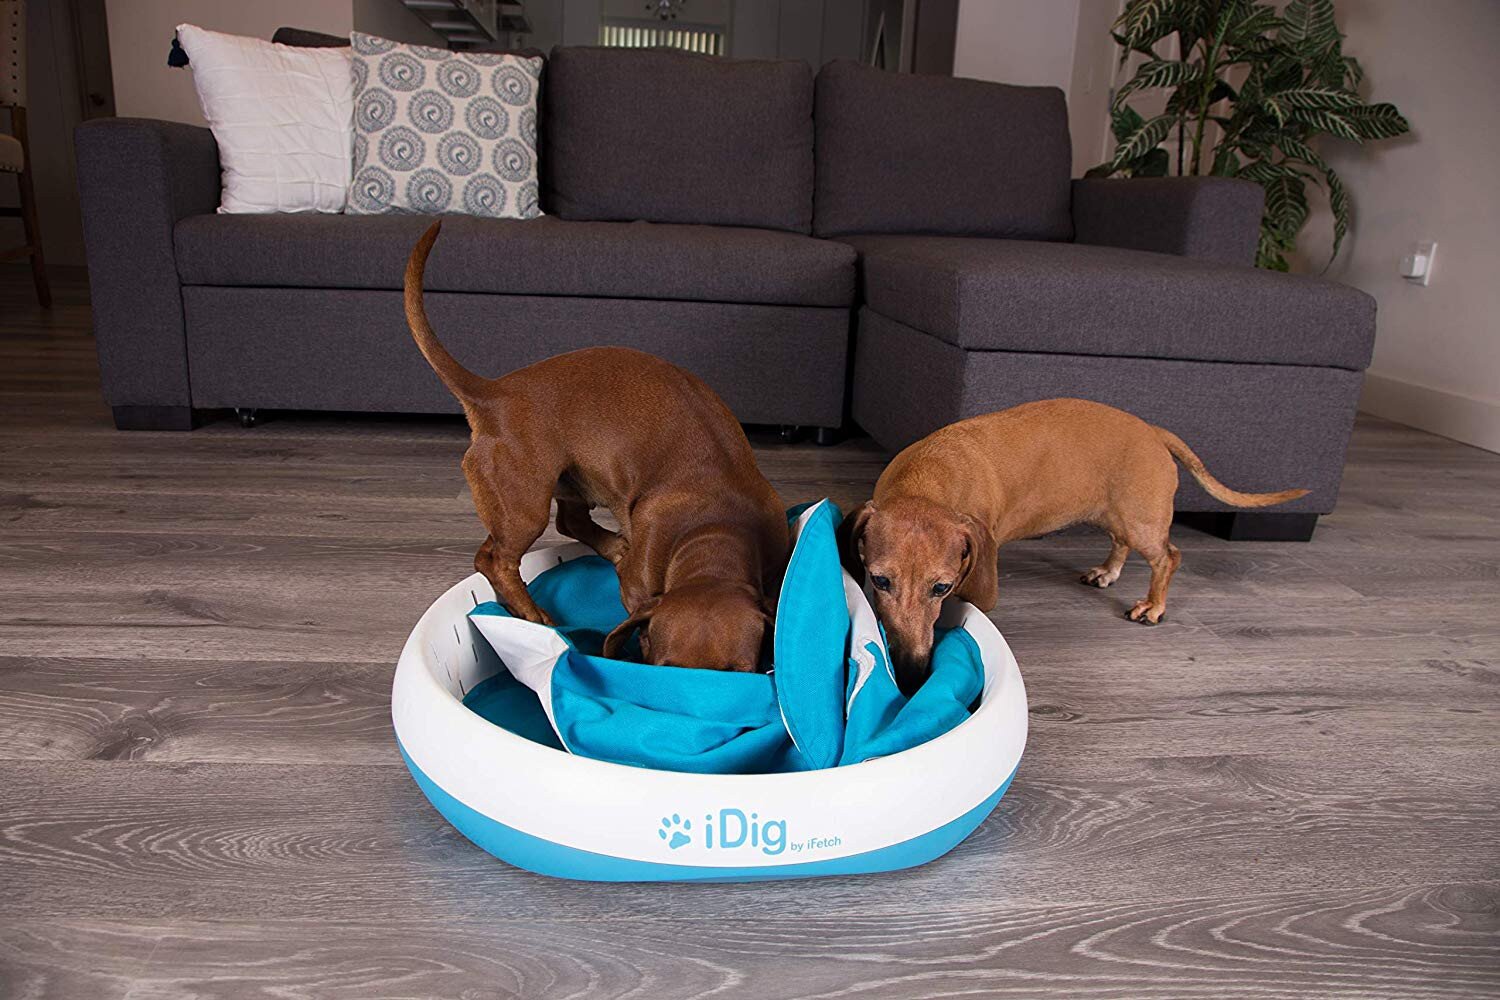 Buy iFetch iDig Digging Toy for Dogs - Stay online Worldwide 